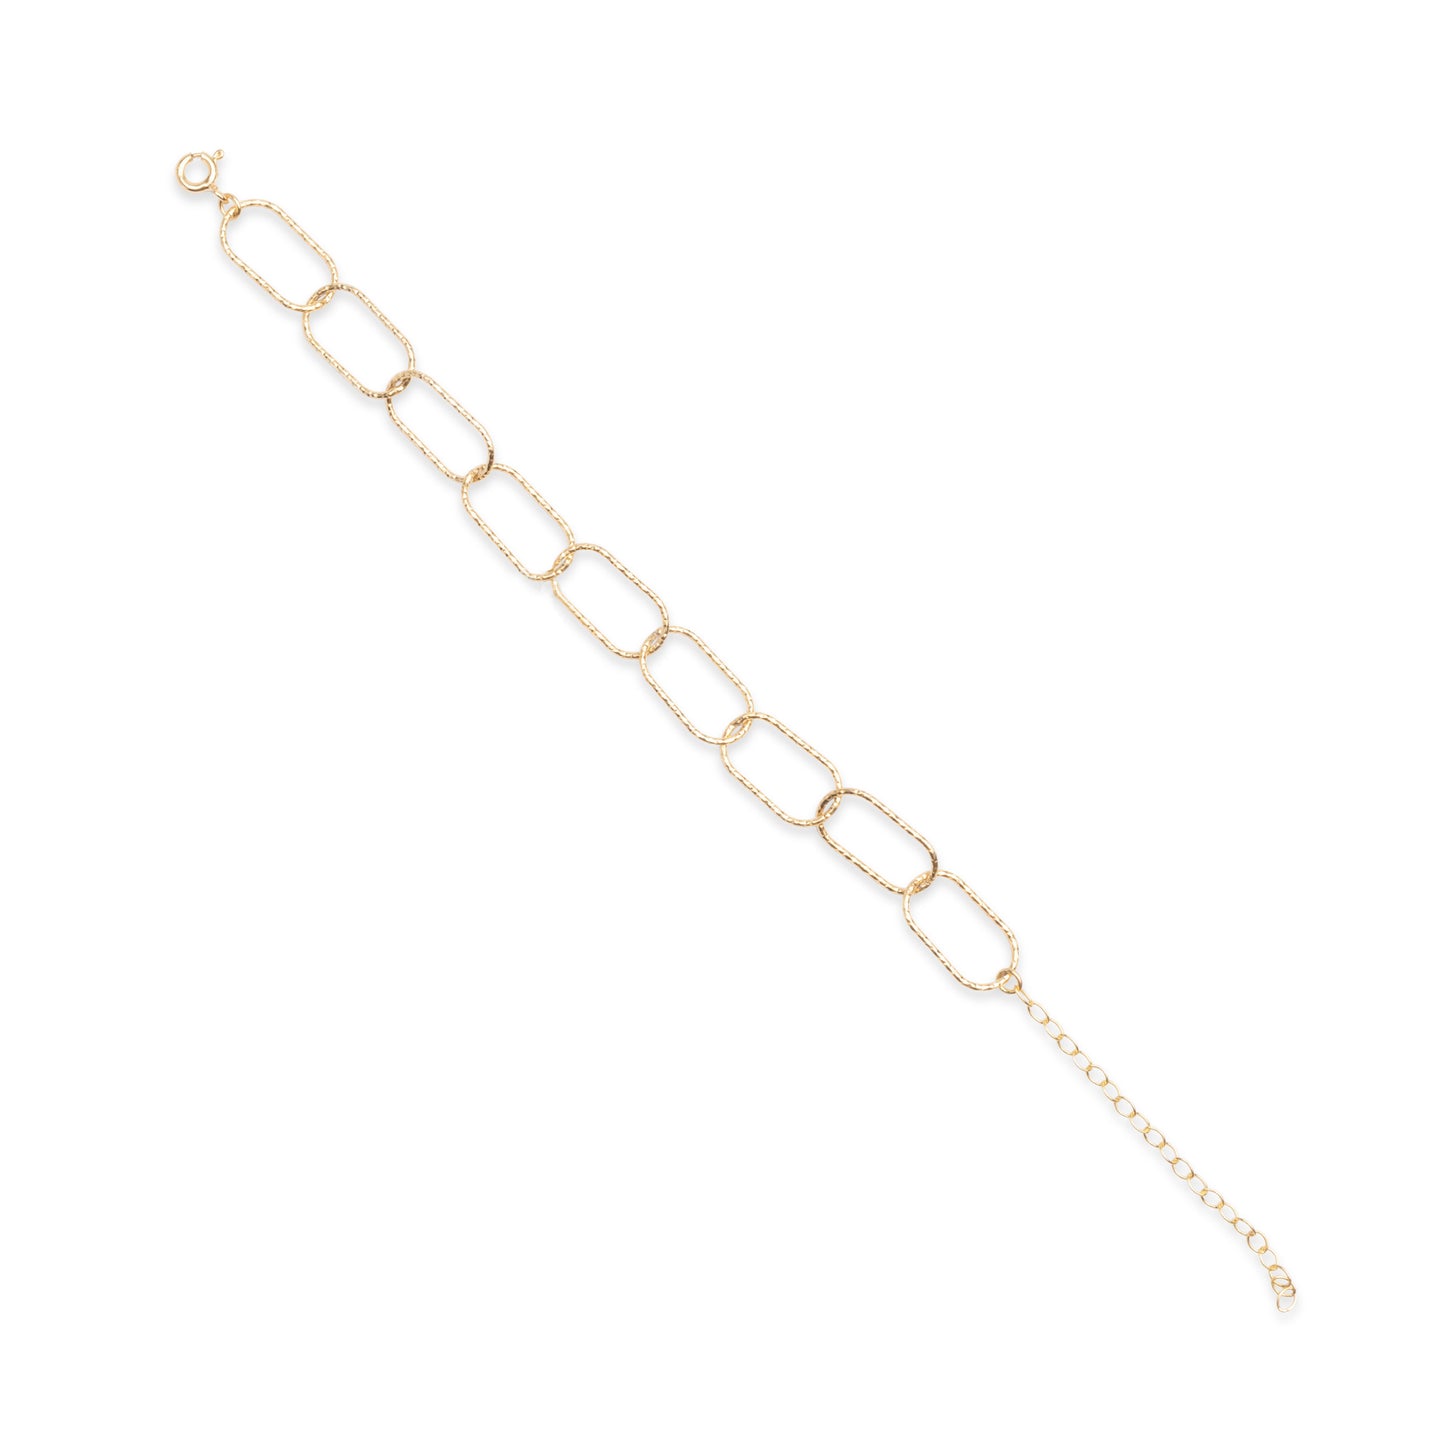 Oval Chainlink Bracelet - Gold Plated